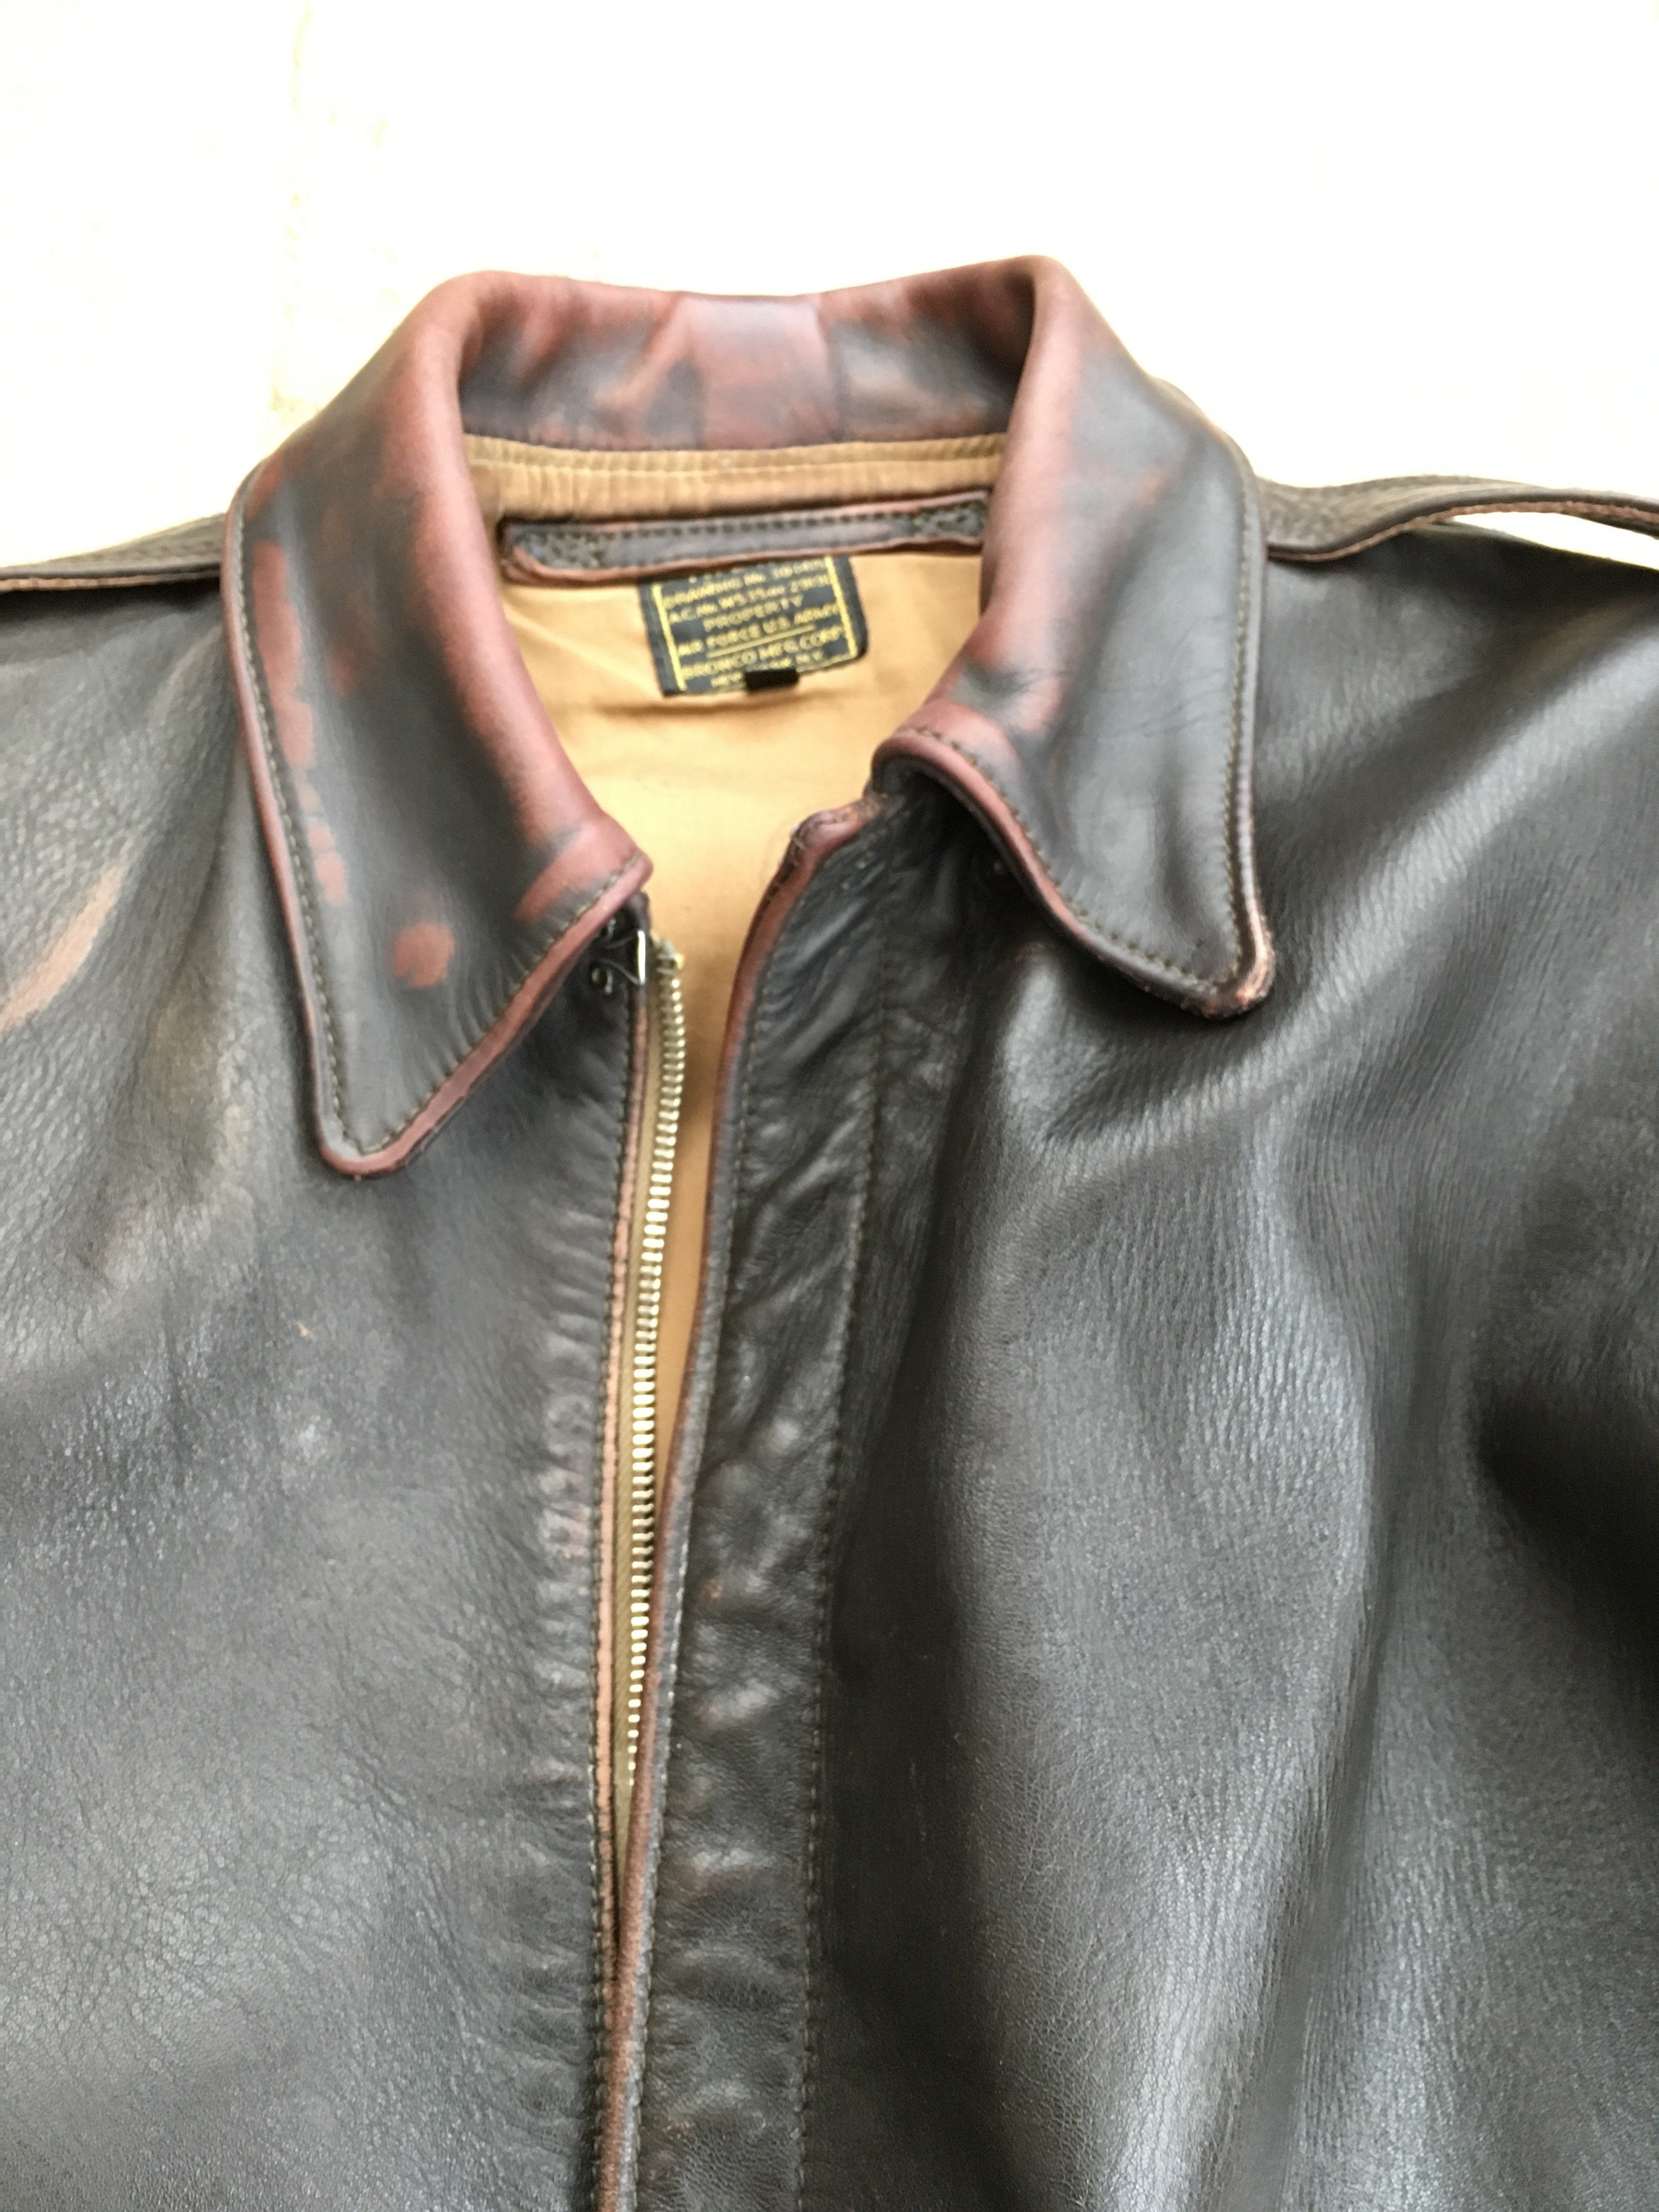 Repro A-2 Jackets with Hard Use--Let's see yours! | Vintage Leather ...